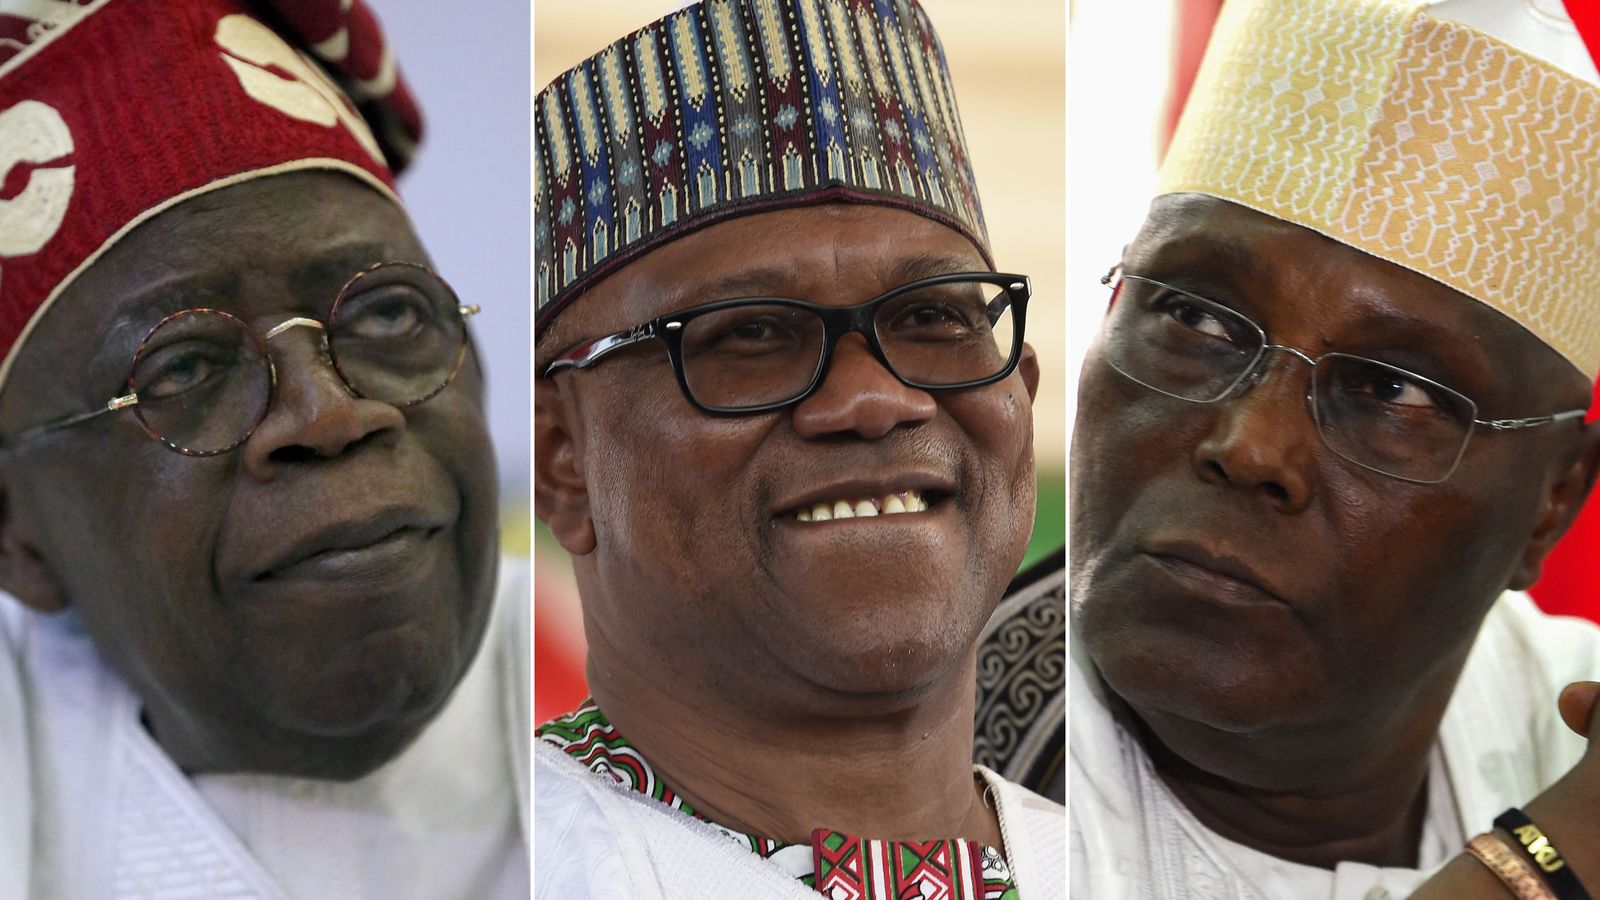 Final rallies held in Nigeria as the country prepares for presidential elections